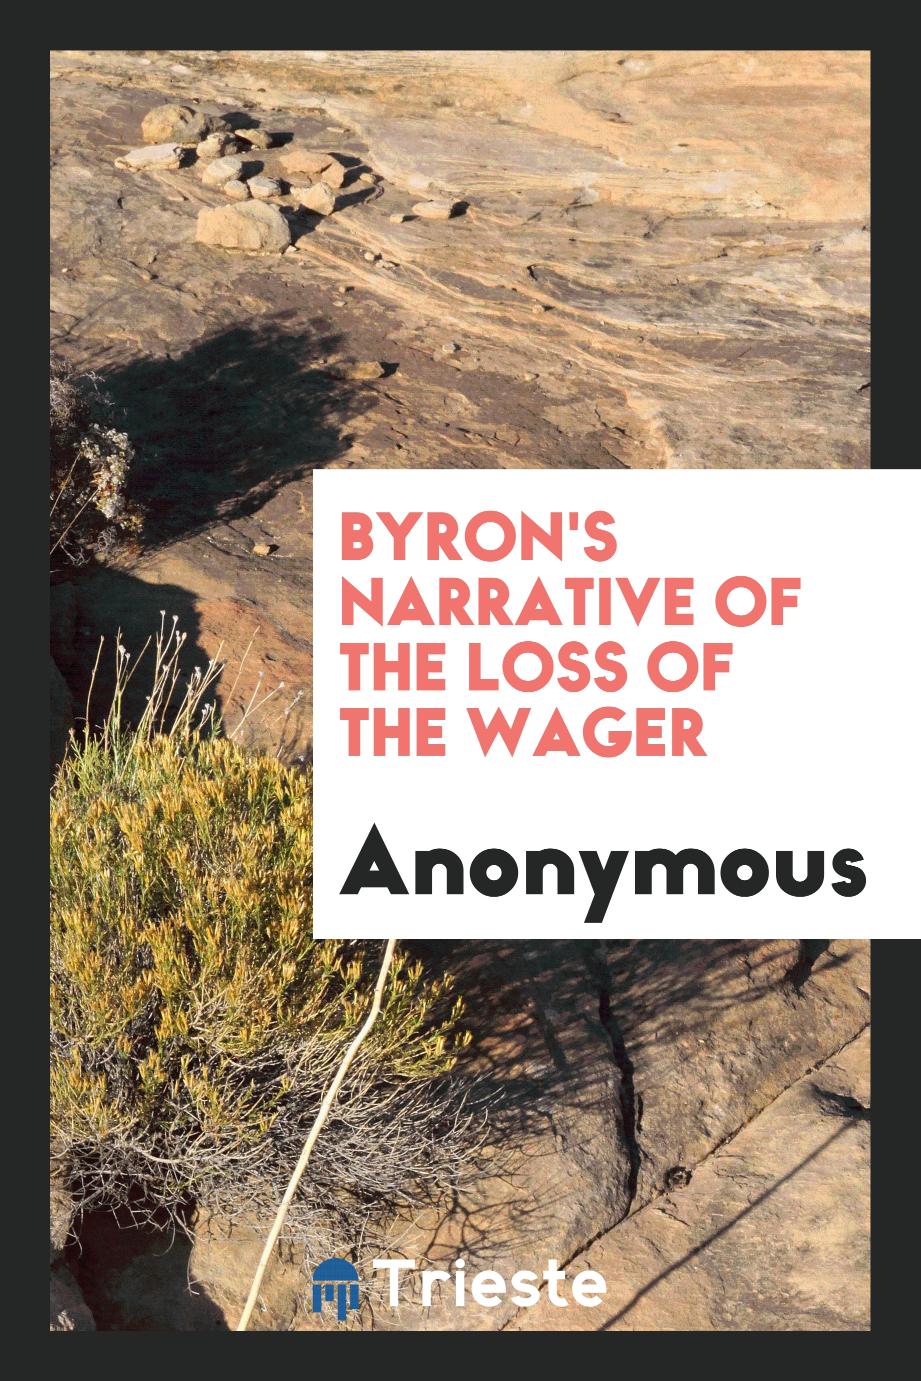 Byron's narrative of the loss of the Wager